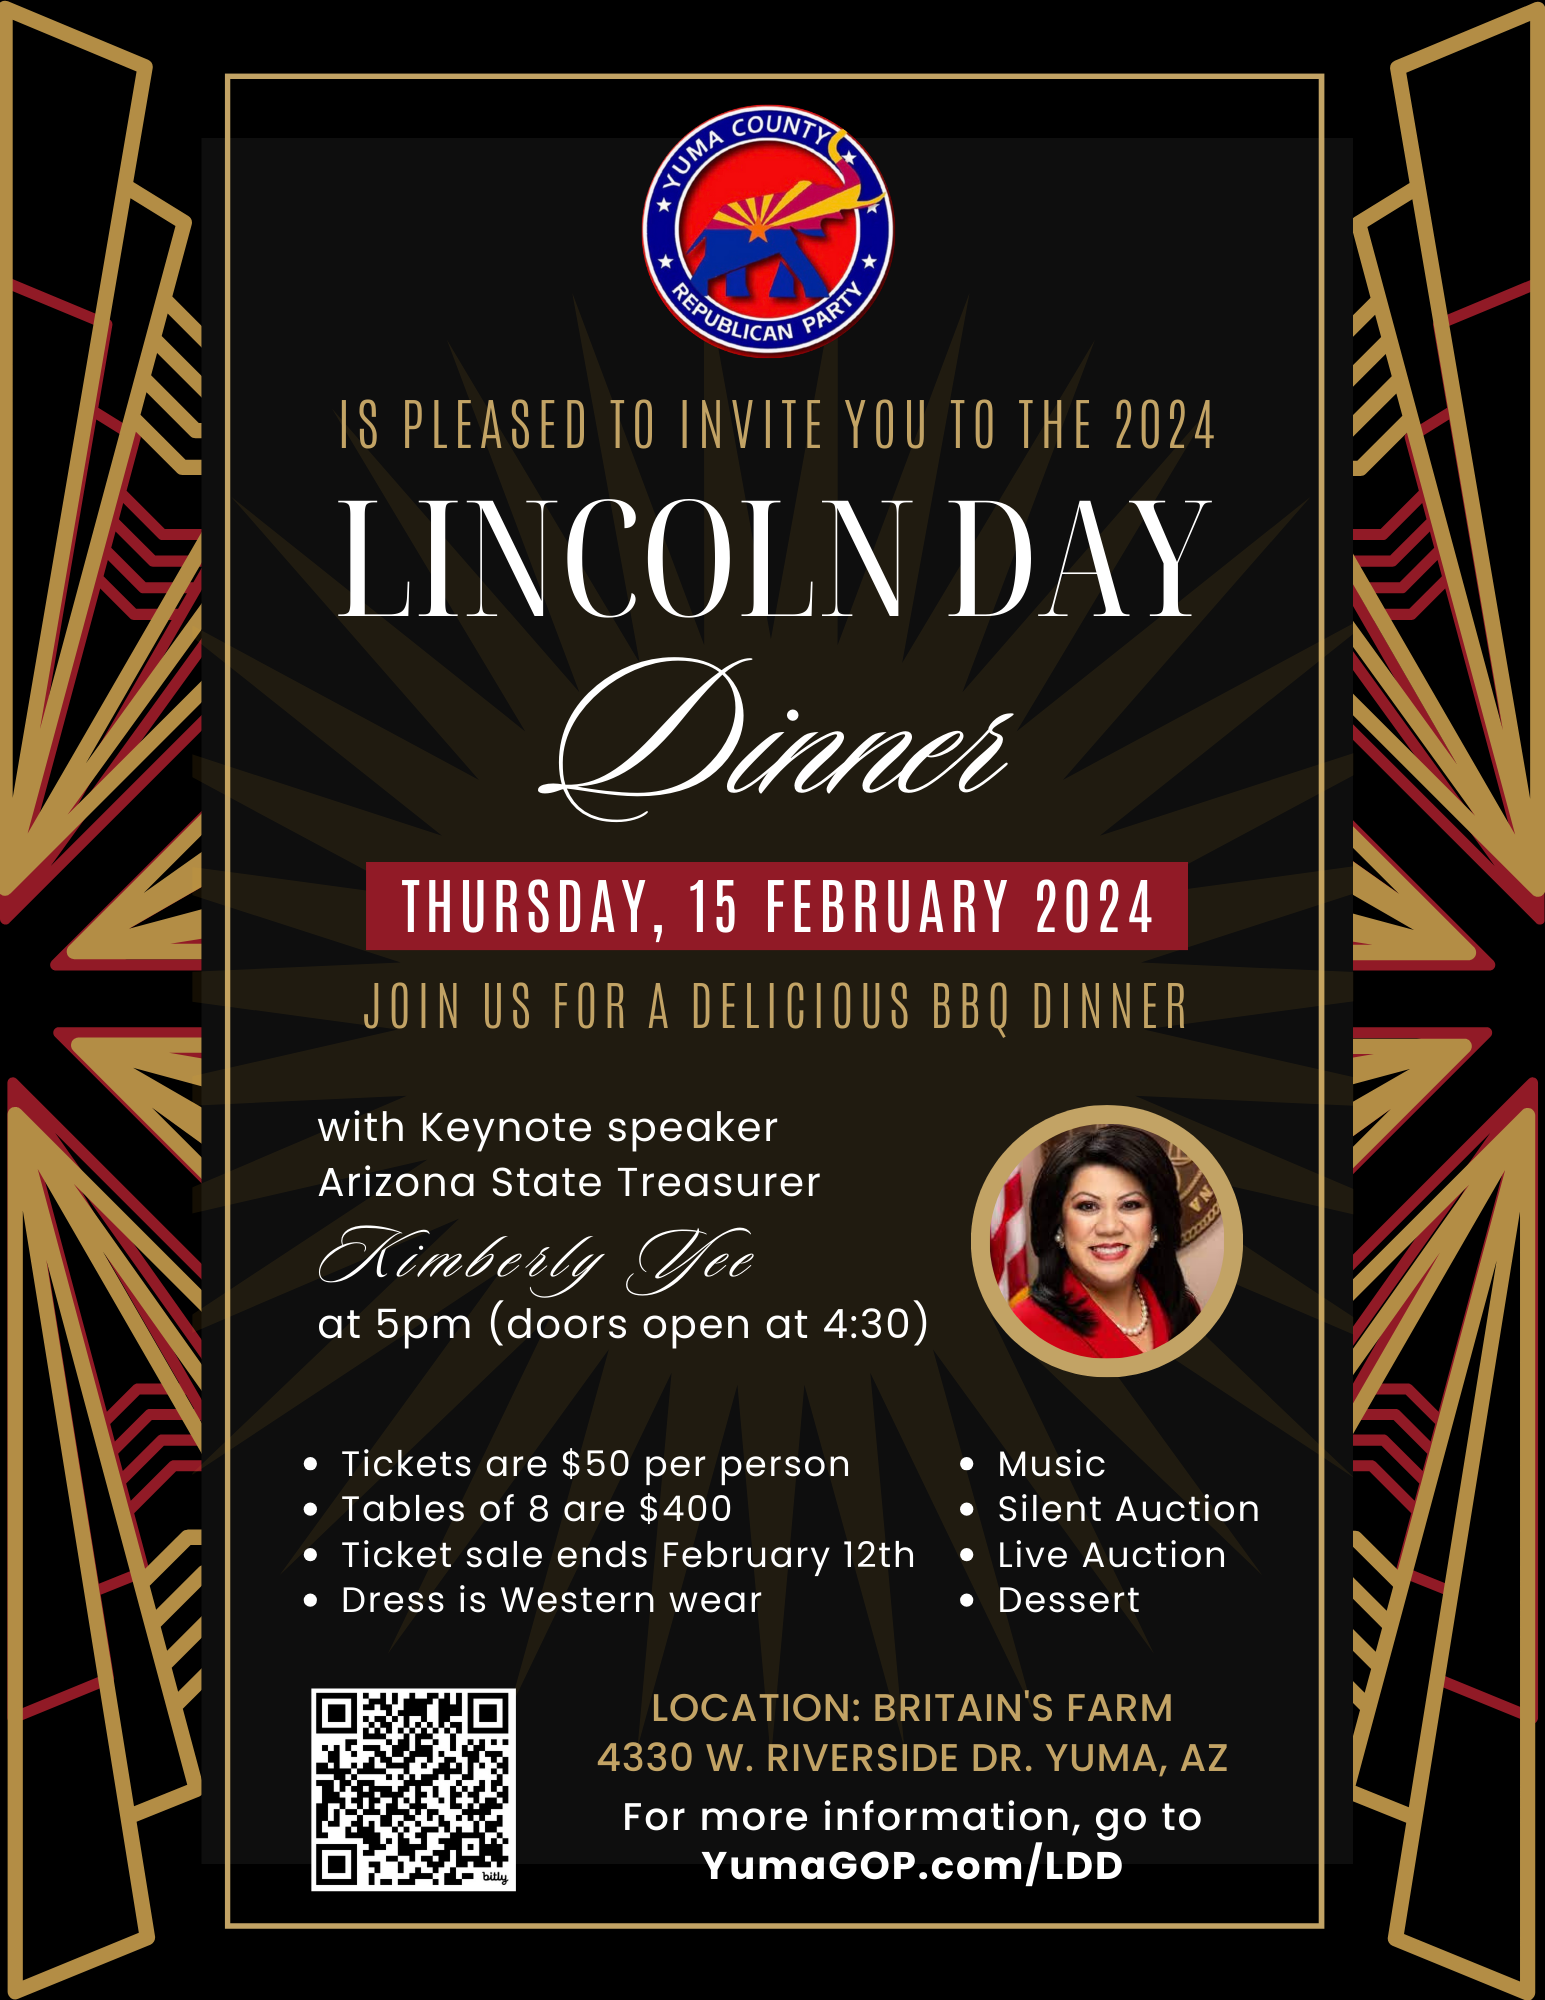 Lincoln Day Dinner - SOLD OUT!